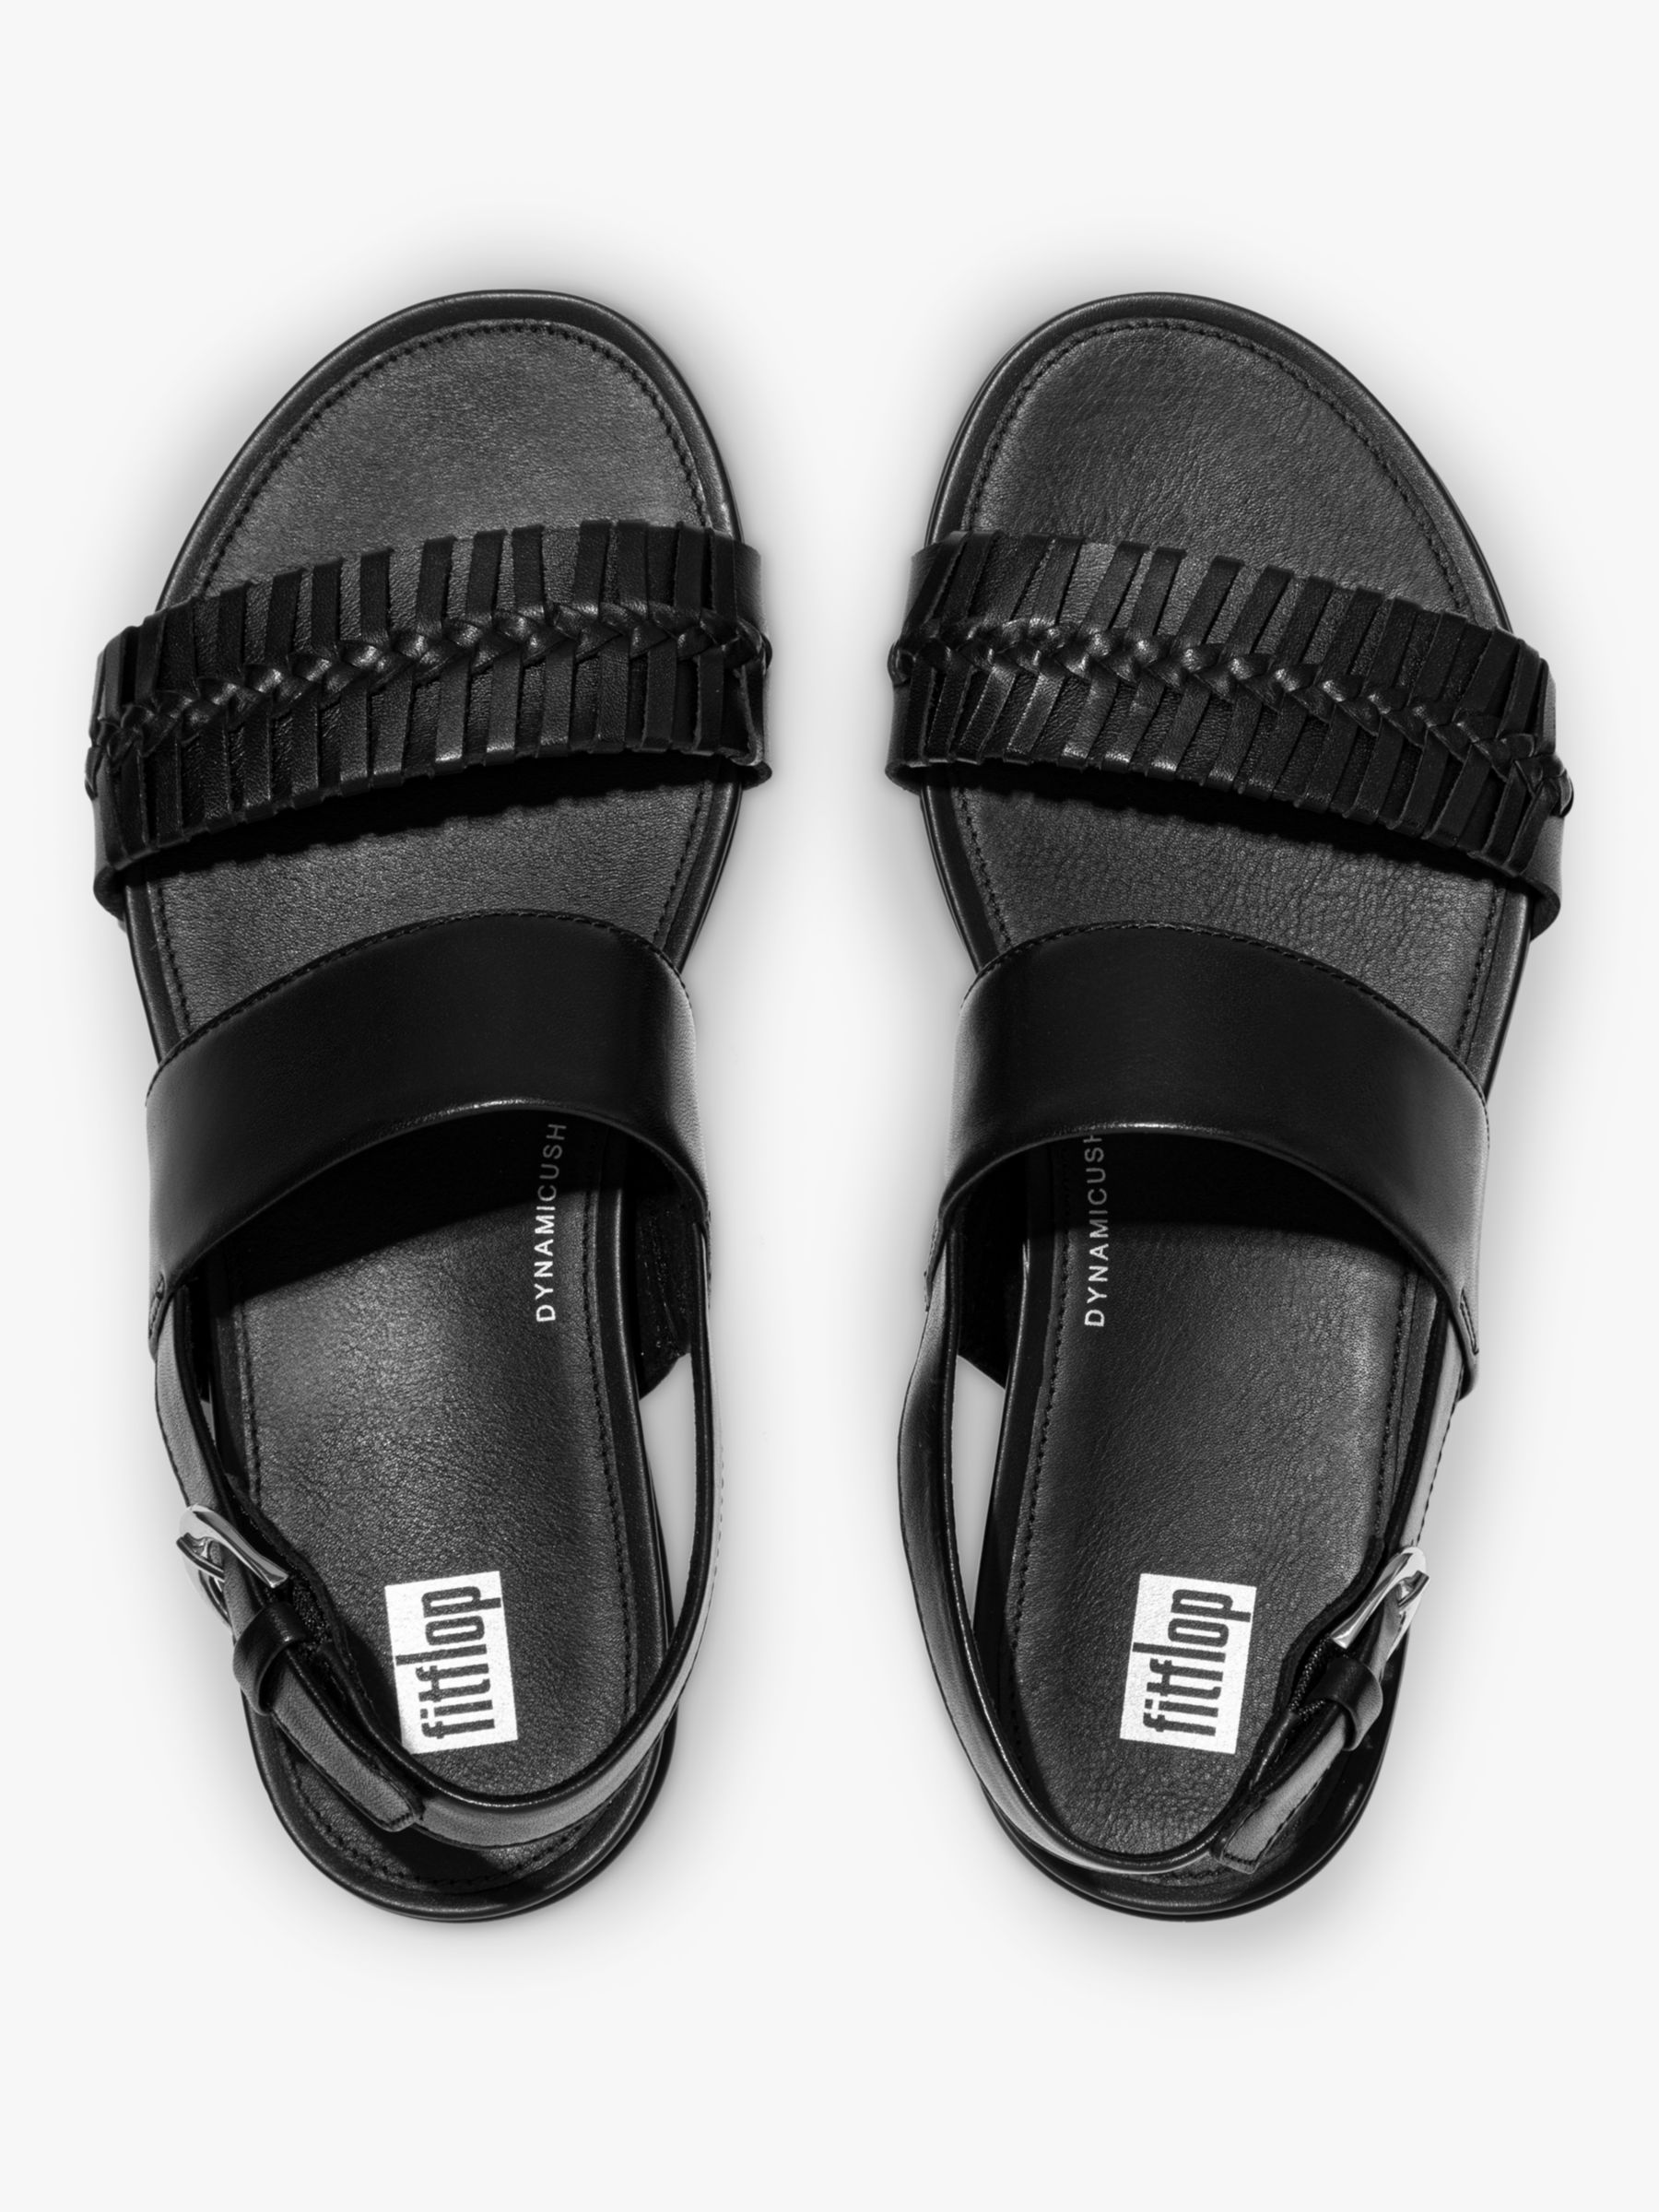 FitFlop Graccie Weave Strappy Sandals, Black at John Lewis & Partners